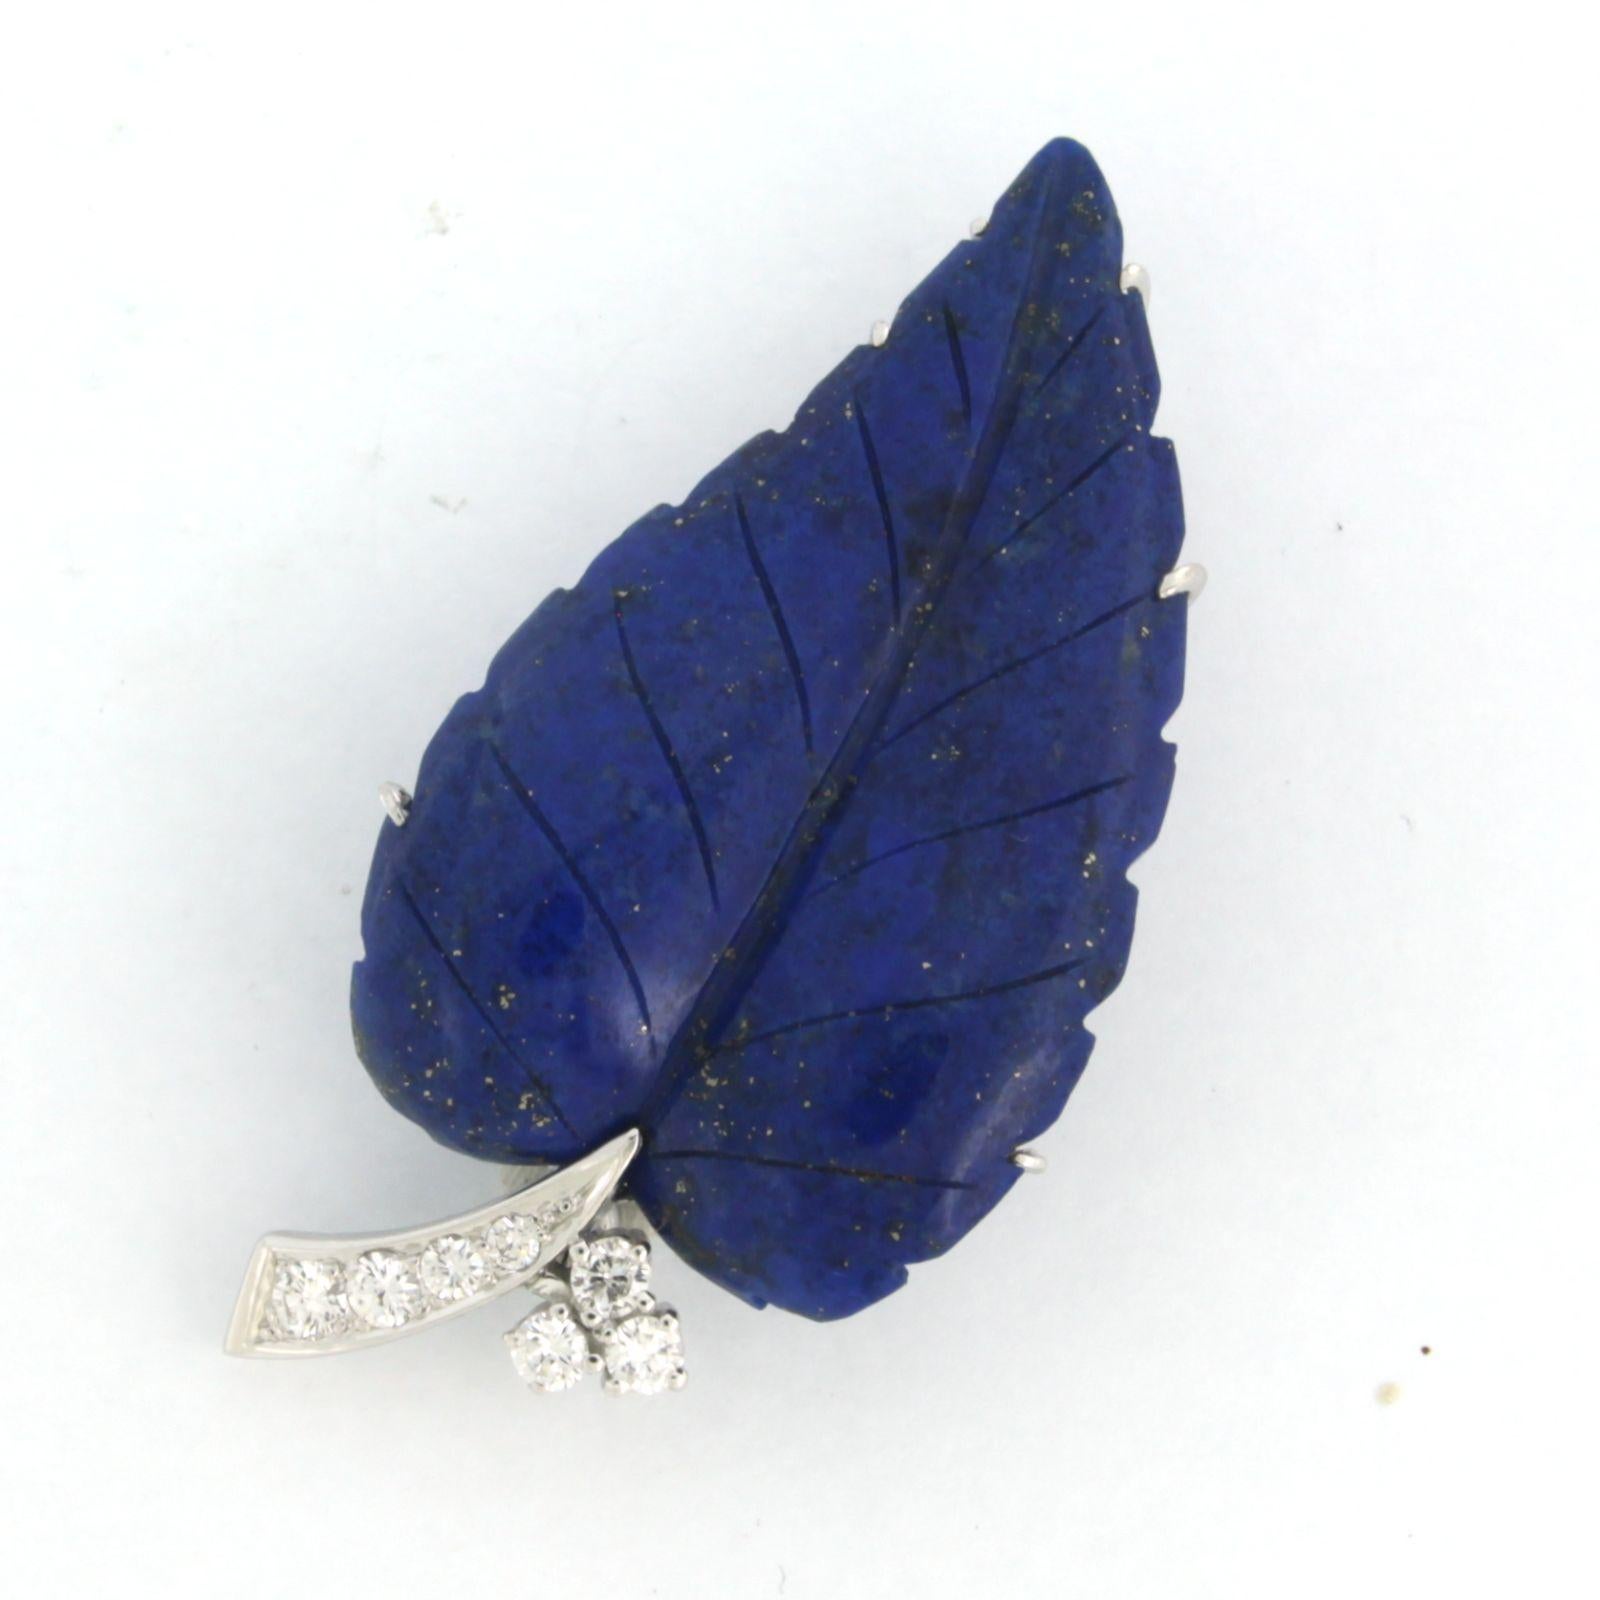 18k white gold Brooch with Lapis Lazuli leaf shape and set with brilliant cut diamonds 0.35 ct F/G VS/SI - 5.0 cm x 2.6 cm

Detailed description

The brooch is 5.0 cm wide and 2.6 cm high

weight: 10.6 grams

Set with:

- 1 x 4.2 cm x 2.6 cm leaf